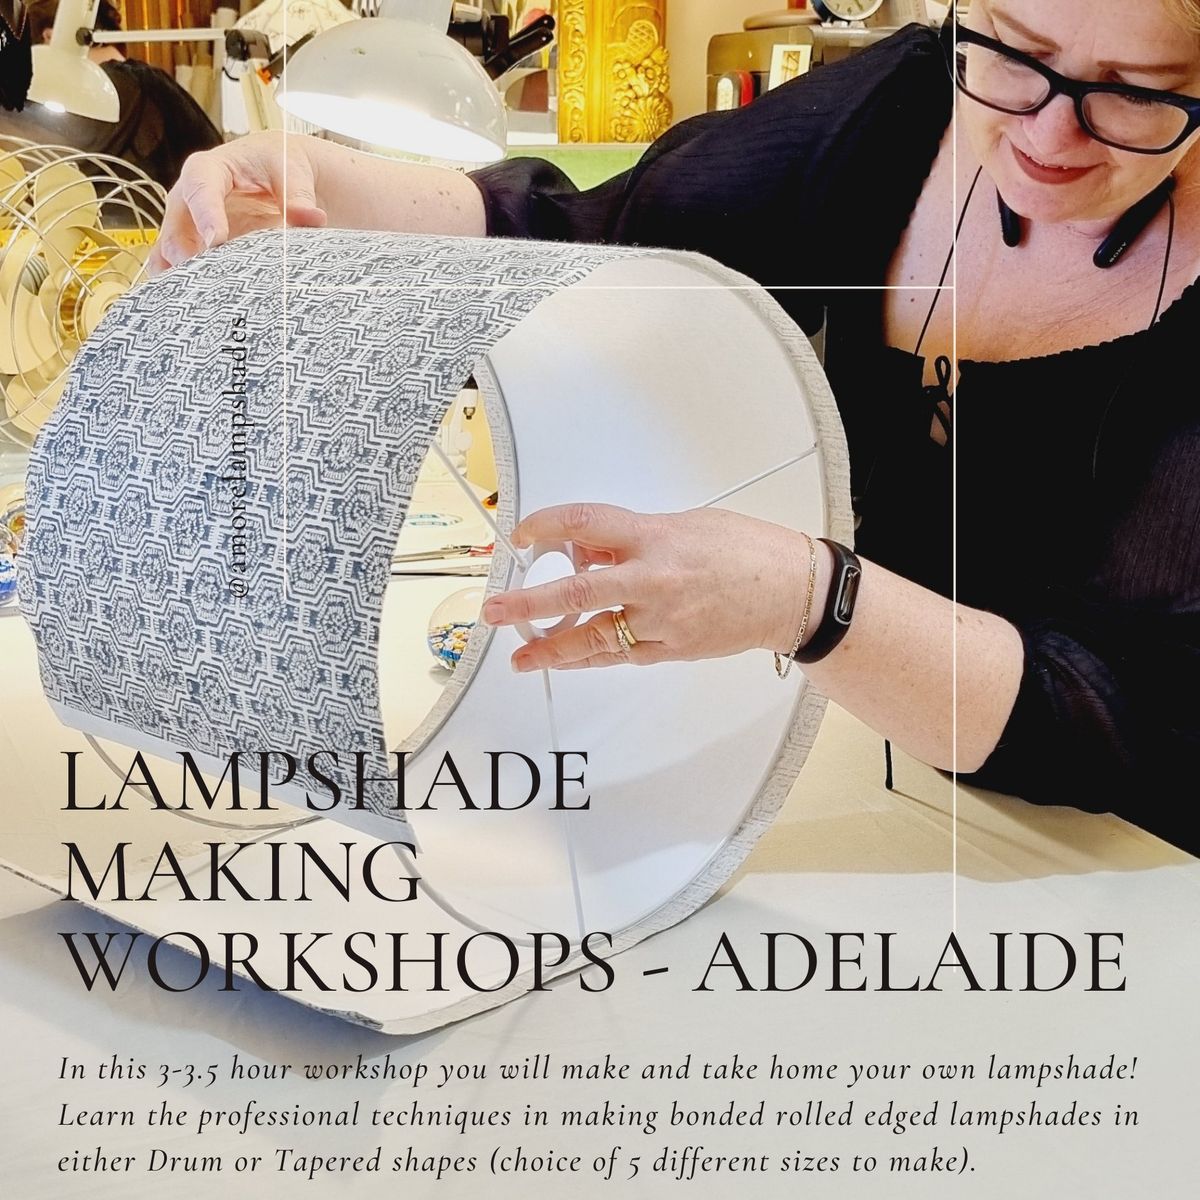 Introduction to Bonded Rolled Edged Lampshades